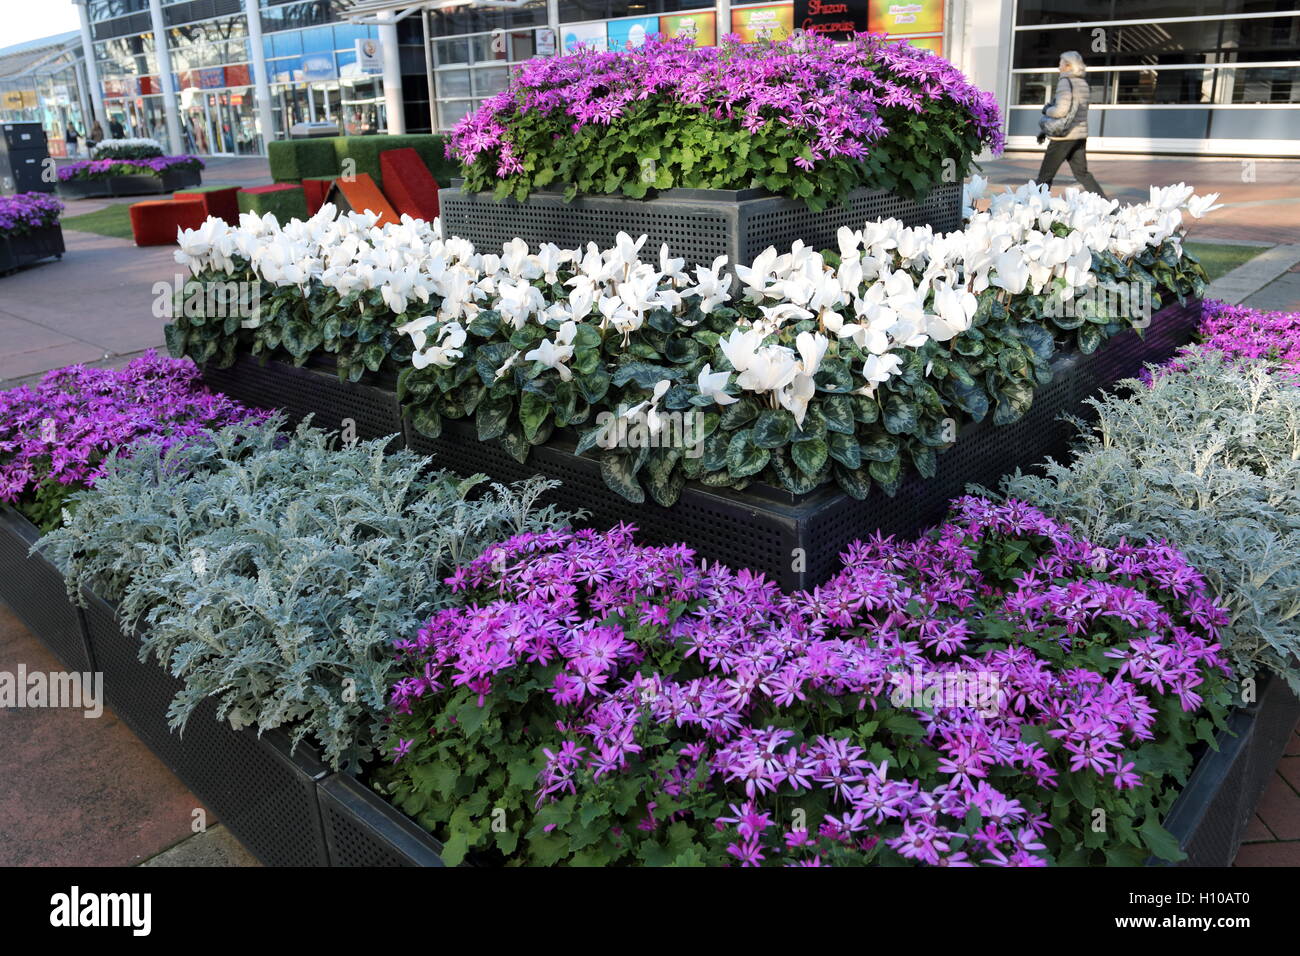 Purple Daisies and White cyclamen on display Stock Photo